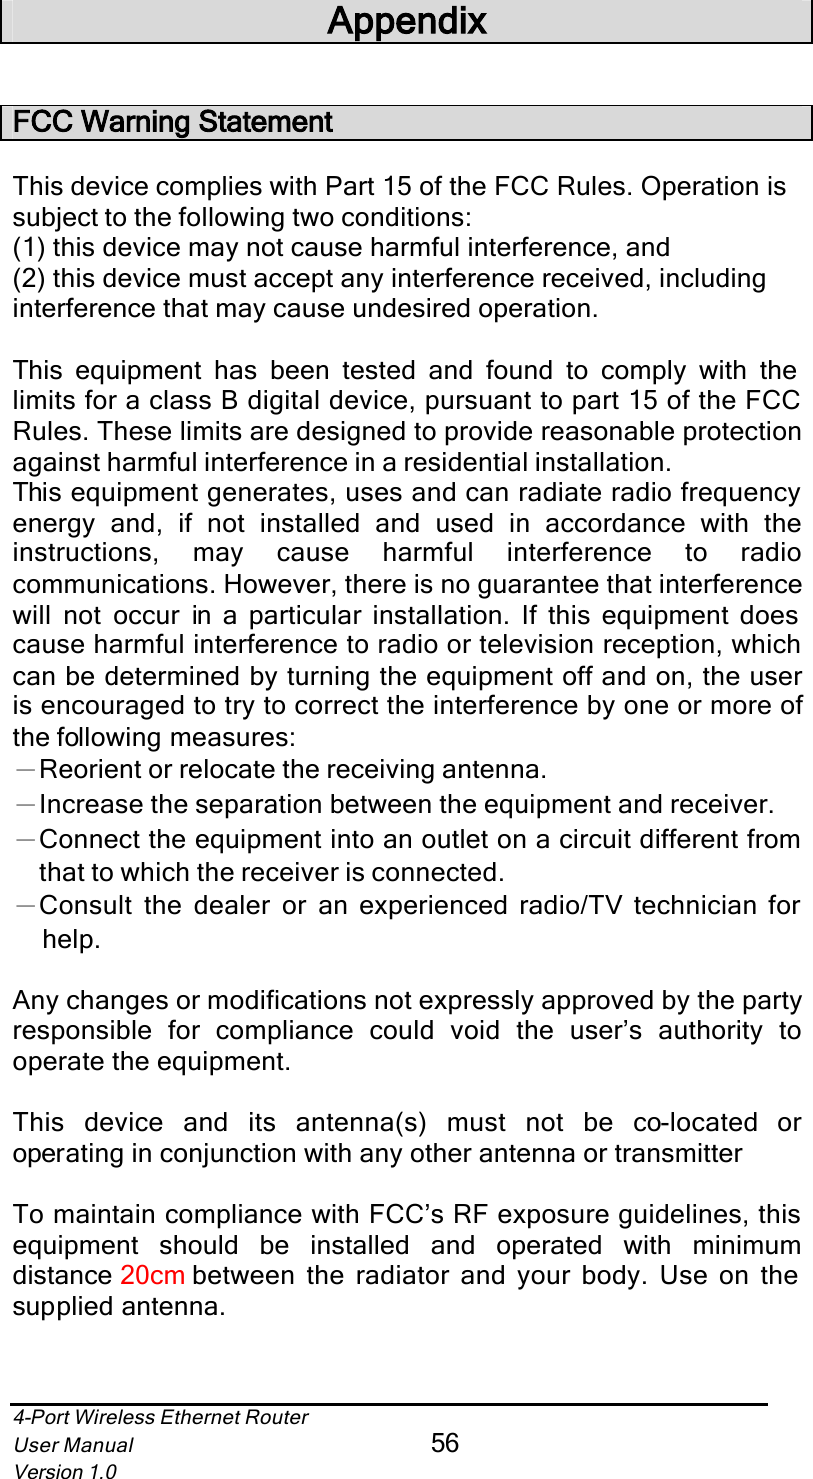 4-Port Wireless Ethernet RouterUser Manual56Version 1.0AppendixFCC Warning StatementThis device complies with Part 15 of the FCC Rules. Operation is subject to the following two conditions: (1) this device may not cause harmful interference, and(2) this device must accept any interference received, including interference that may cause undesired operation.This equipment has been tested and found to comply with the limits for a class B digital device, pursuant to part 15 of the FCC Rules. These limits are designed to provide reasonable protection against harmful interference in a residential installation.This equipment generates, uses and can radiate radio frequency energy and, if not installed and used in accordance with theinstructions, may cause harmful interference to radiocommunications. However, there is no guarantee that interference will not occur in a particular installation. If this equipment does cause harmful interference to radio or television reception, which can be determined by turning the equipment off and on, the user is encouraged to try to correct the interference by one or more of the following measures:ЁReorient or relocate the receiving antenna.ЁIncrease the separation between the equipment and receiver.ЁConnect the equipment into an outlet on a circuit different from that to which the receiver is connected.ЁConsult the dealer or an experienced radio/TV technician for help.Any changes or modifications not expressly approved by the party responsible for compliance could void the user’s authority tooperate the equipment.This device and its antenna(s) must not be co-located oroperating in conjunction with any other antenna or transmitterTo maintain compliance with FCC’s RF exposure guidelines, this equipment should be installed and operated with minimumdistance 20cm between the radiator and your body. Use on the supplied antenna.